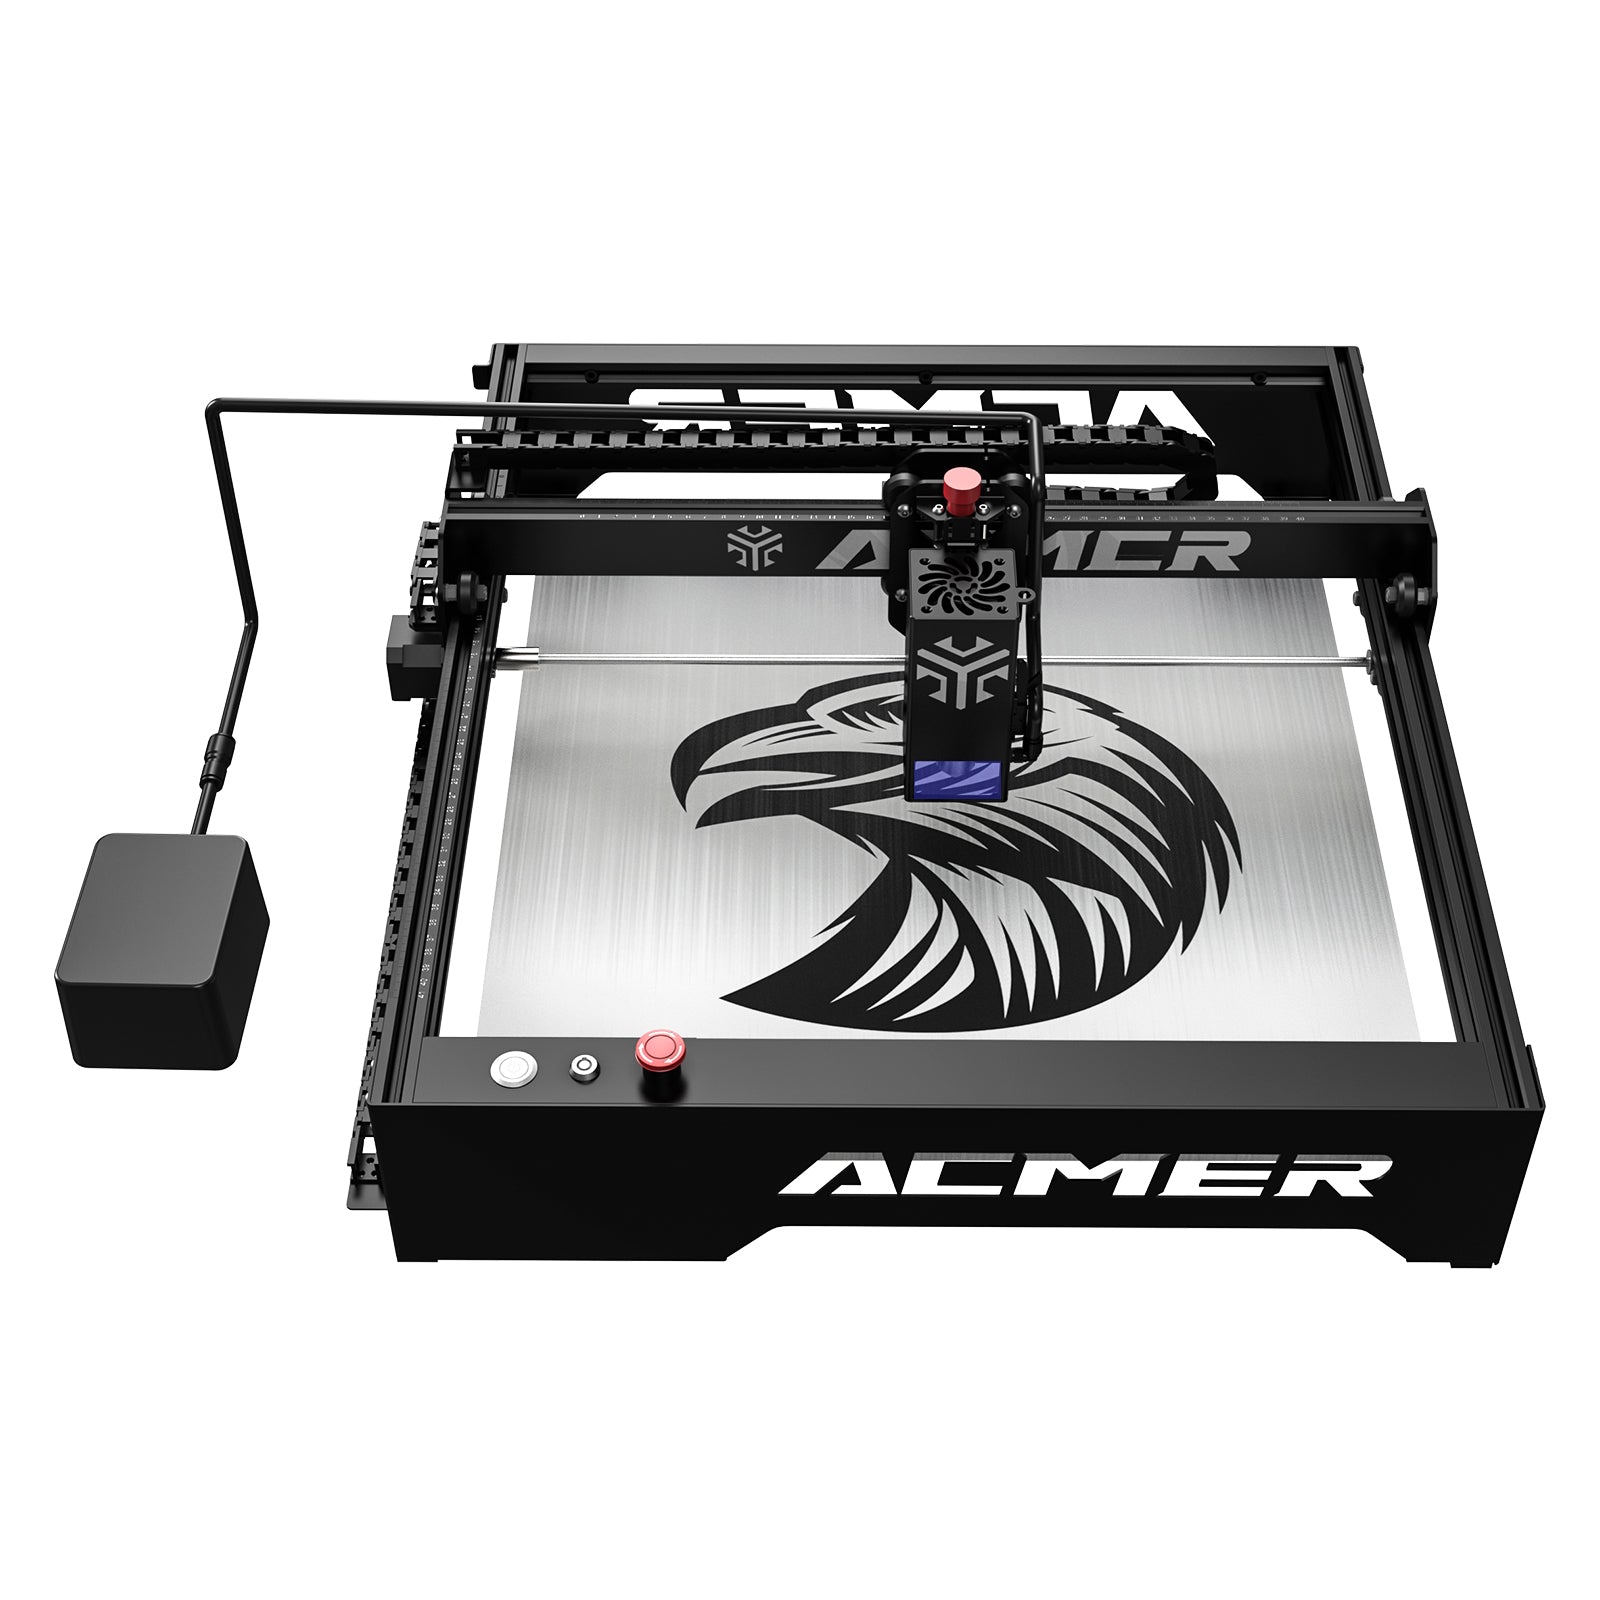 Official Refurbished-ACMER P1 20W Laser Engraver Cutting Machine